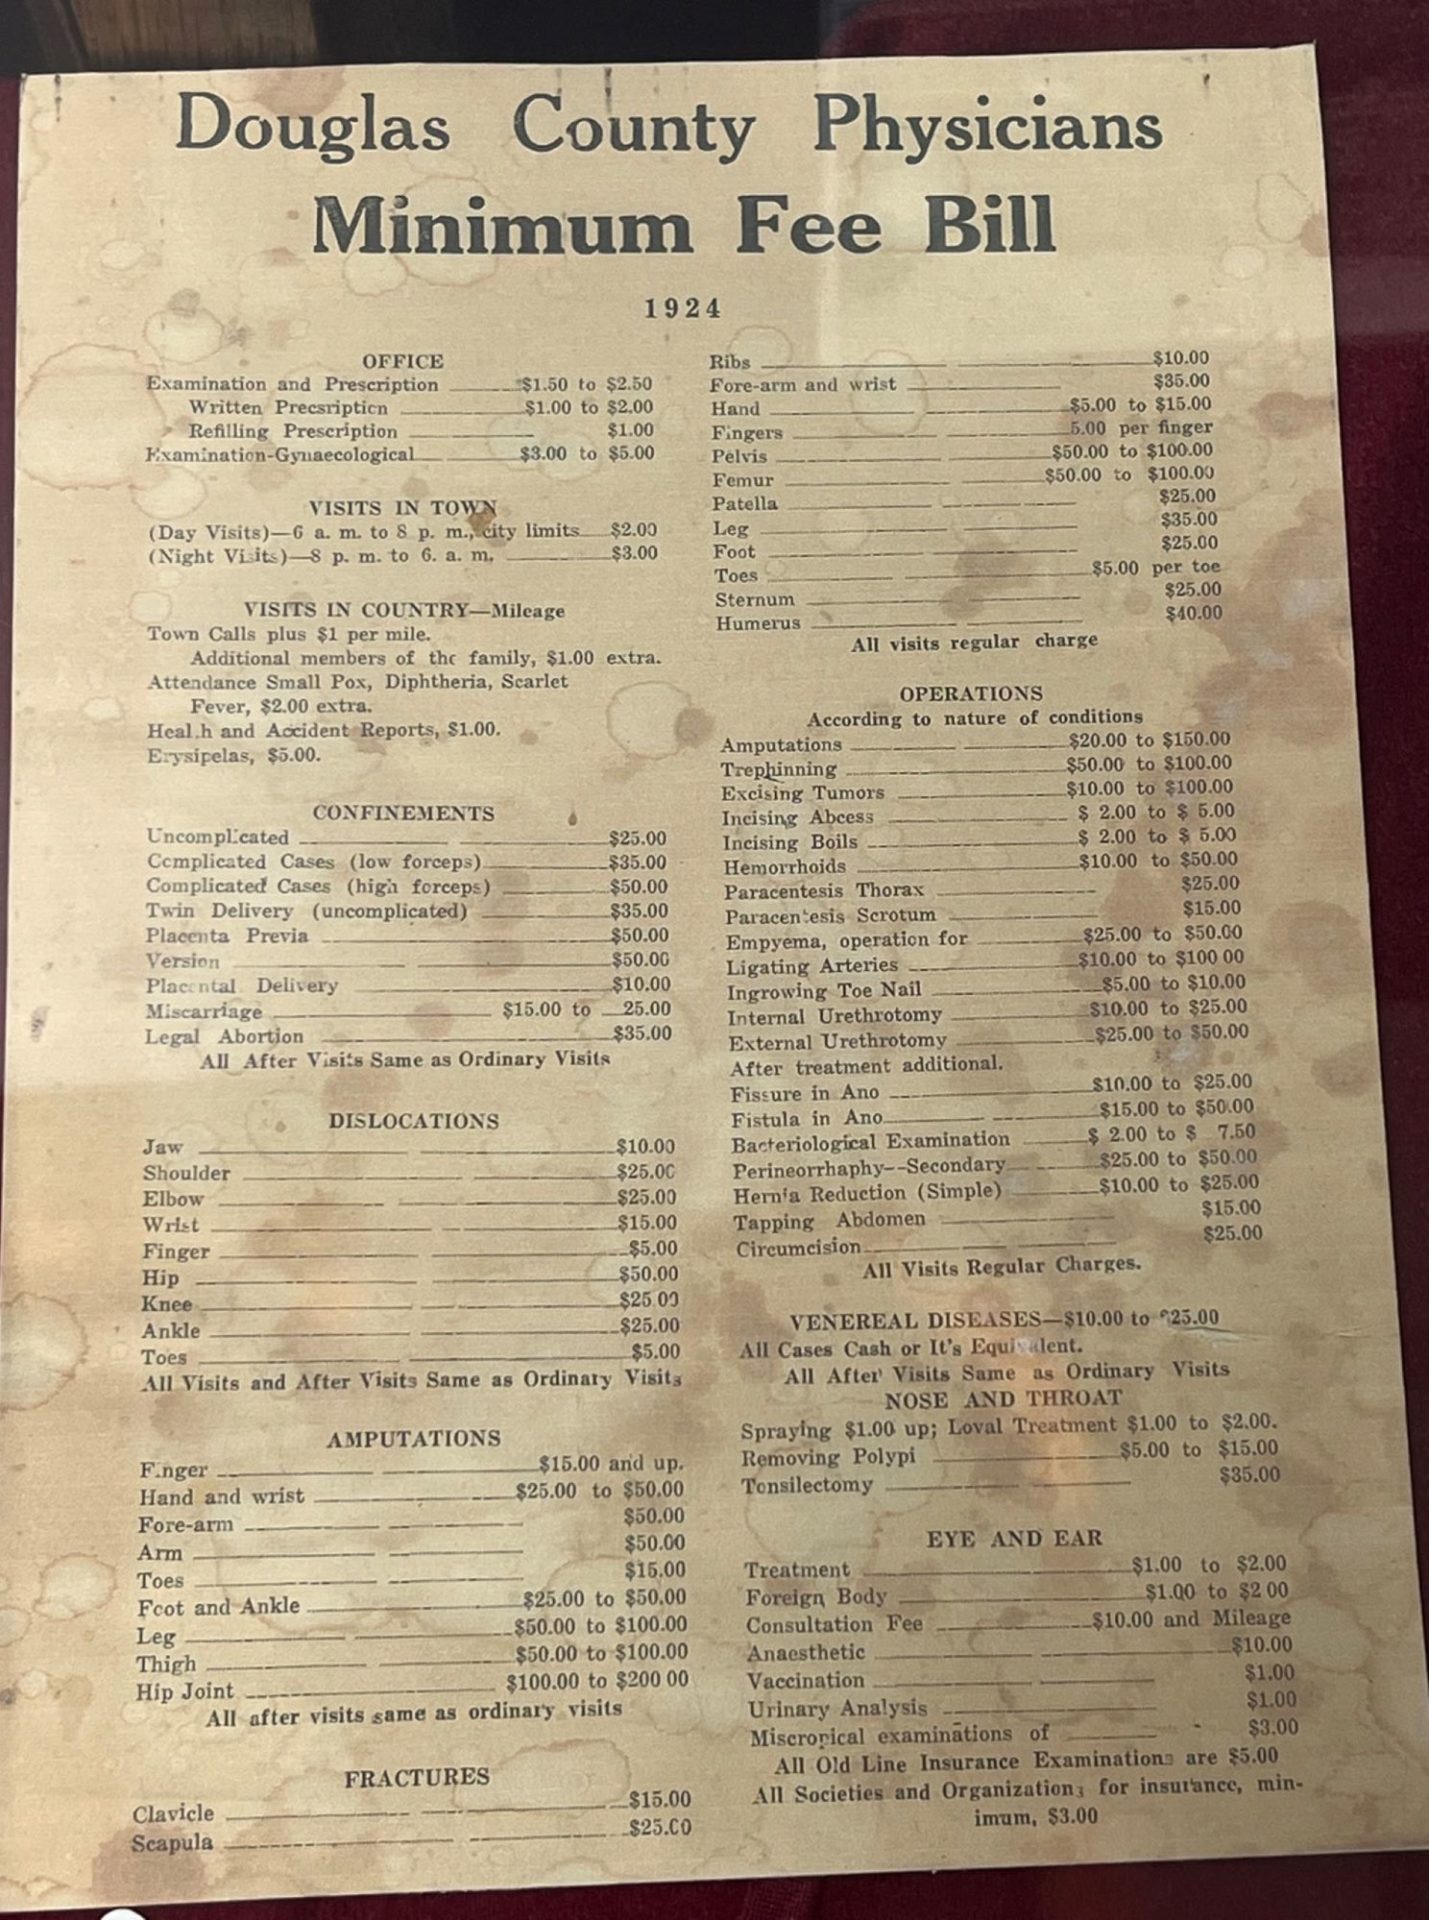 A yellowed document that says Douglas County Physicians Minimum Fee Bill in black type. There are lists of procedures and prices. 